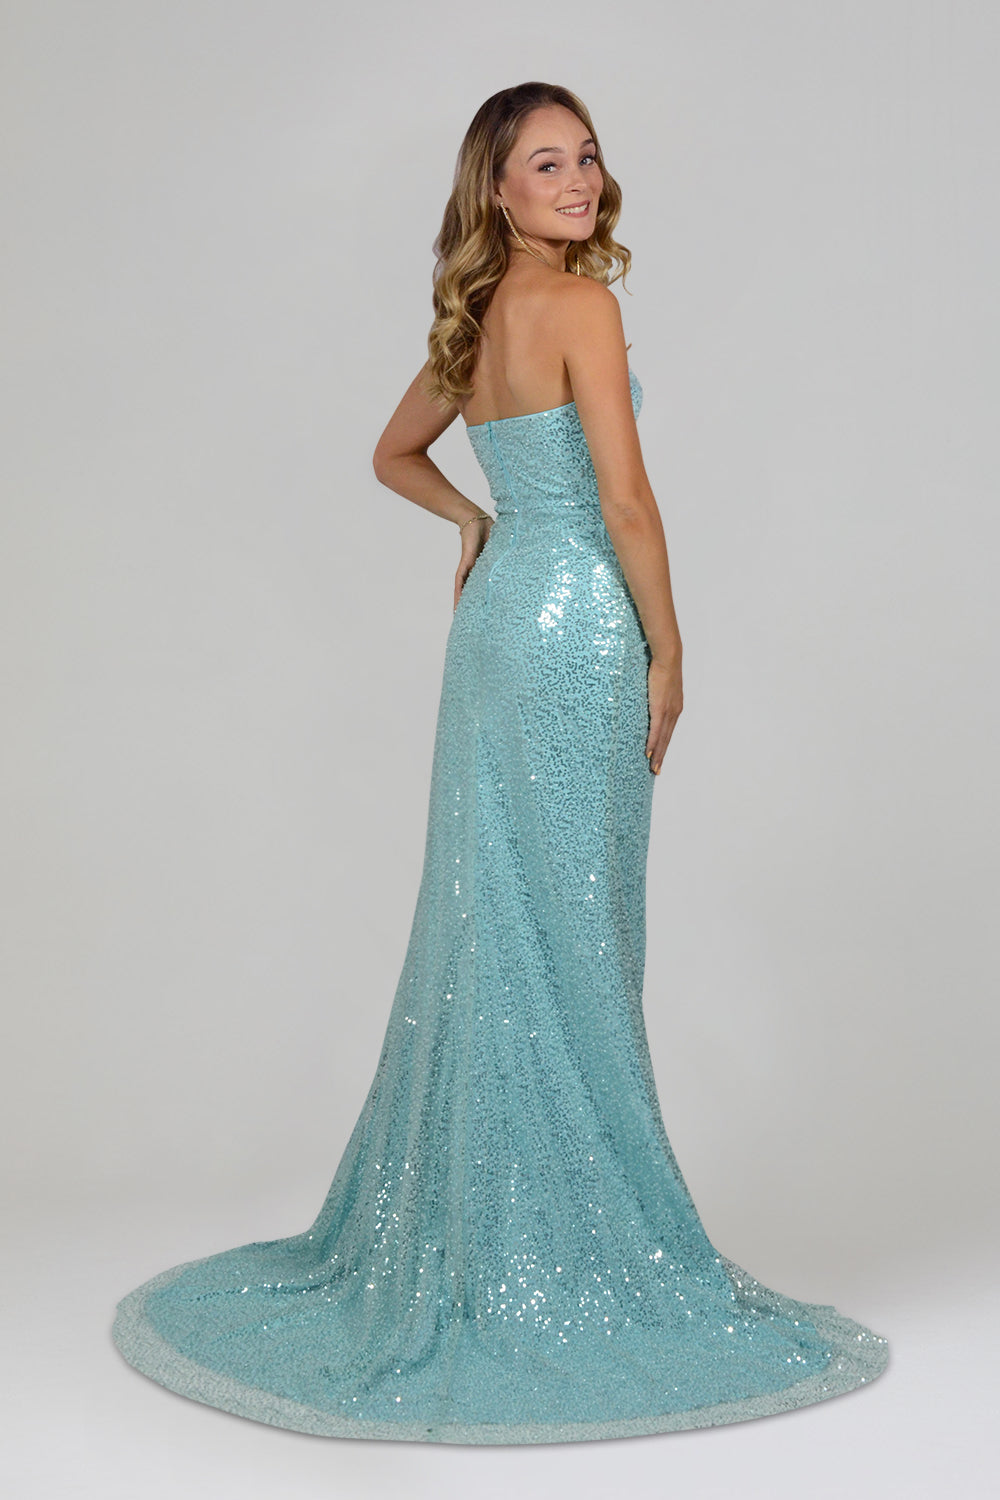 custom made sequin turquoise bridesmaid gowns australia online envious bridal & formal